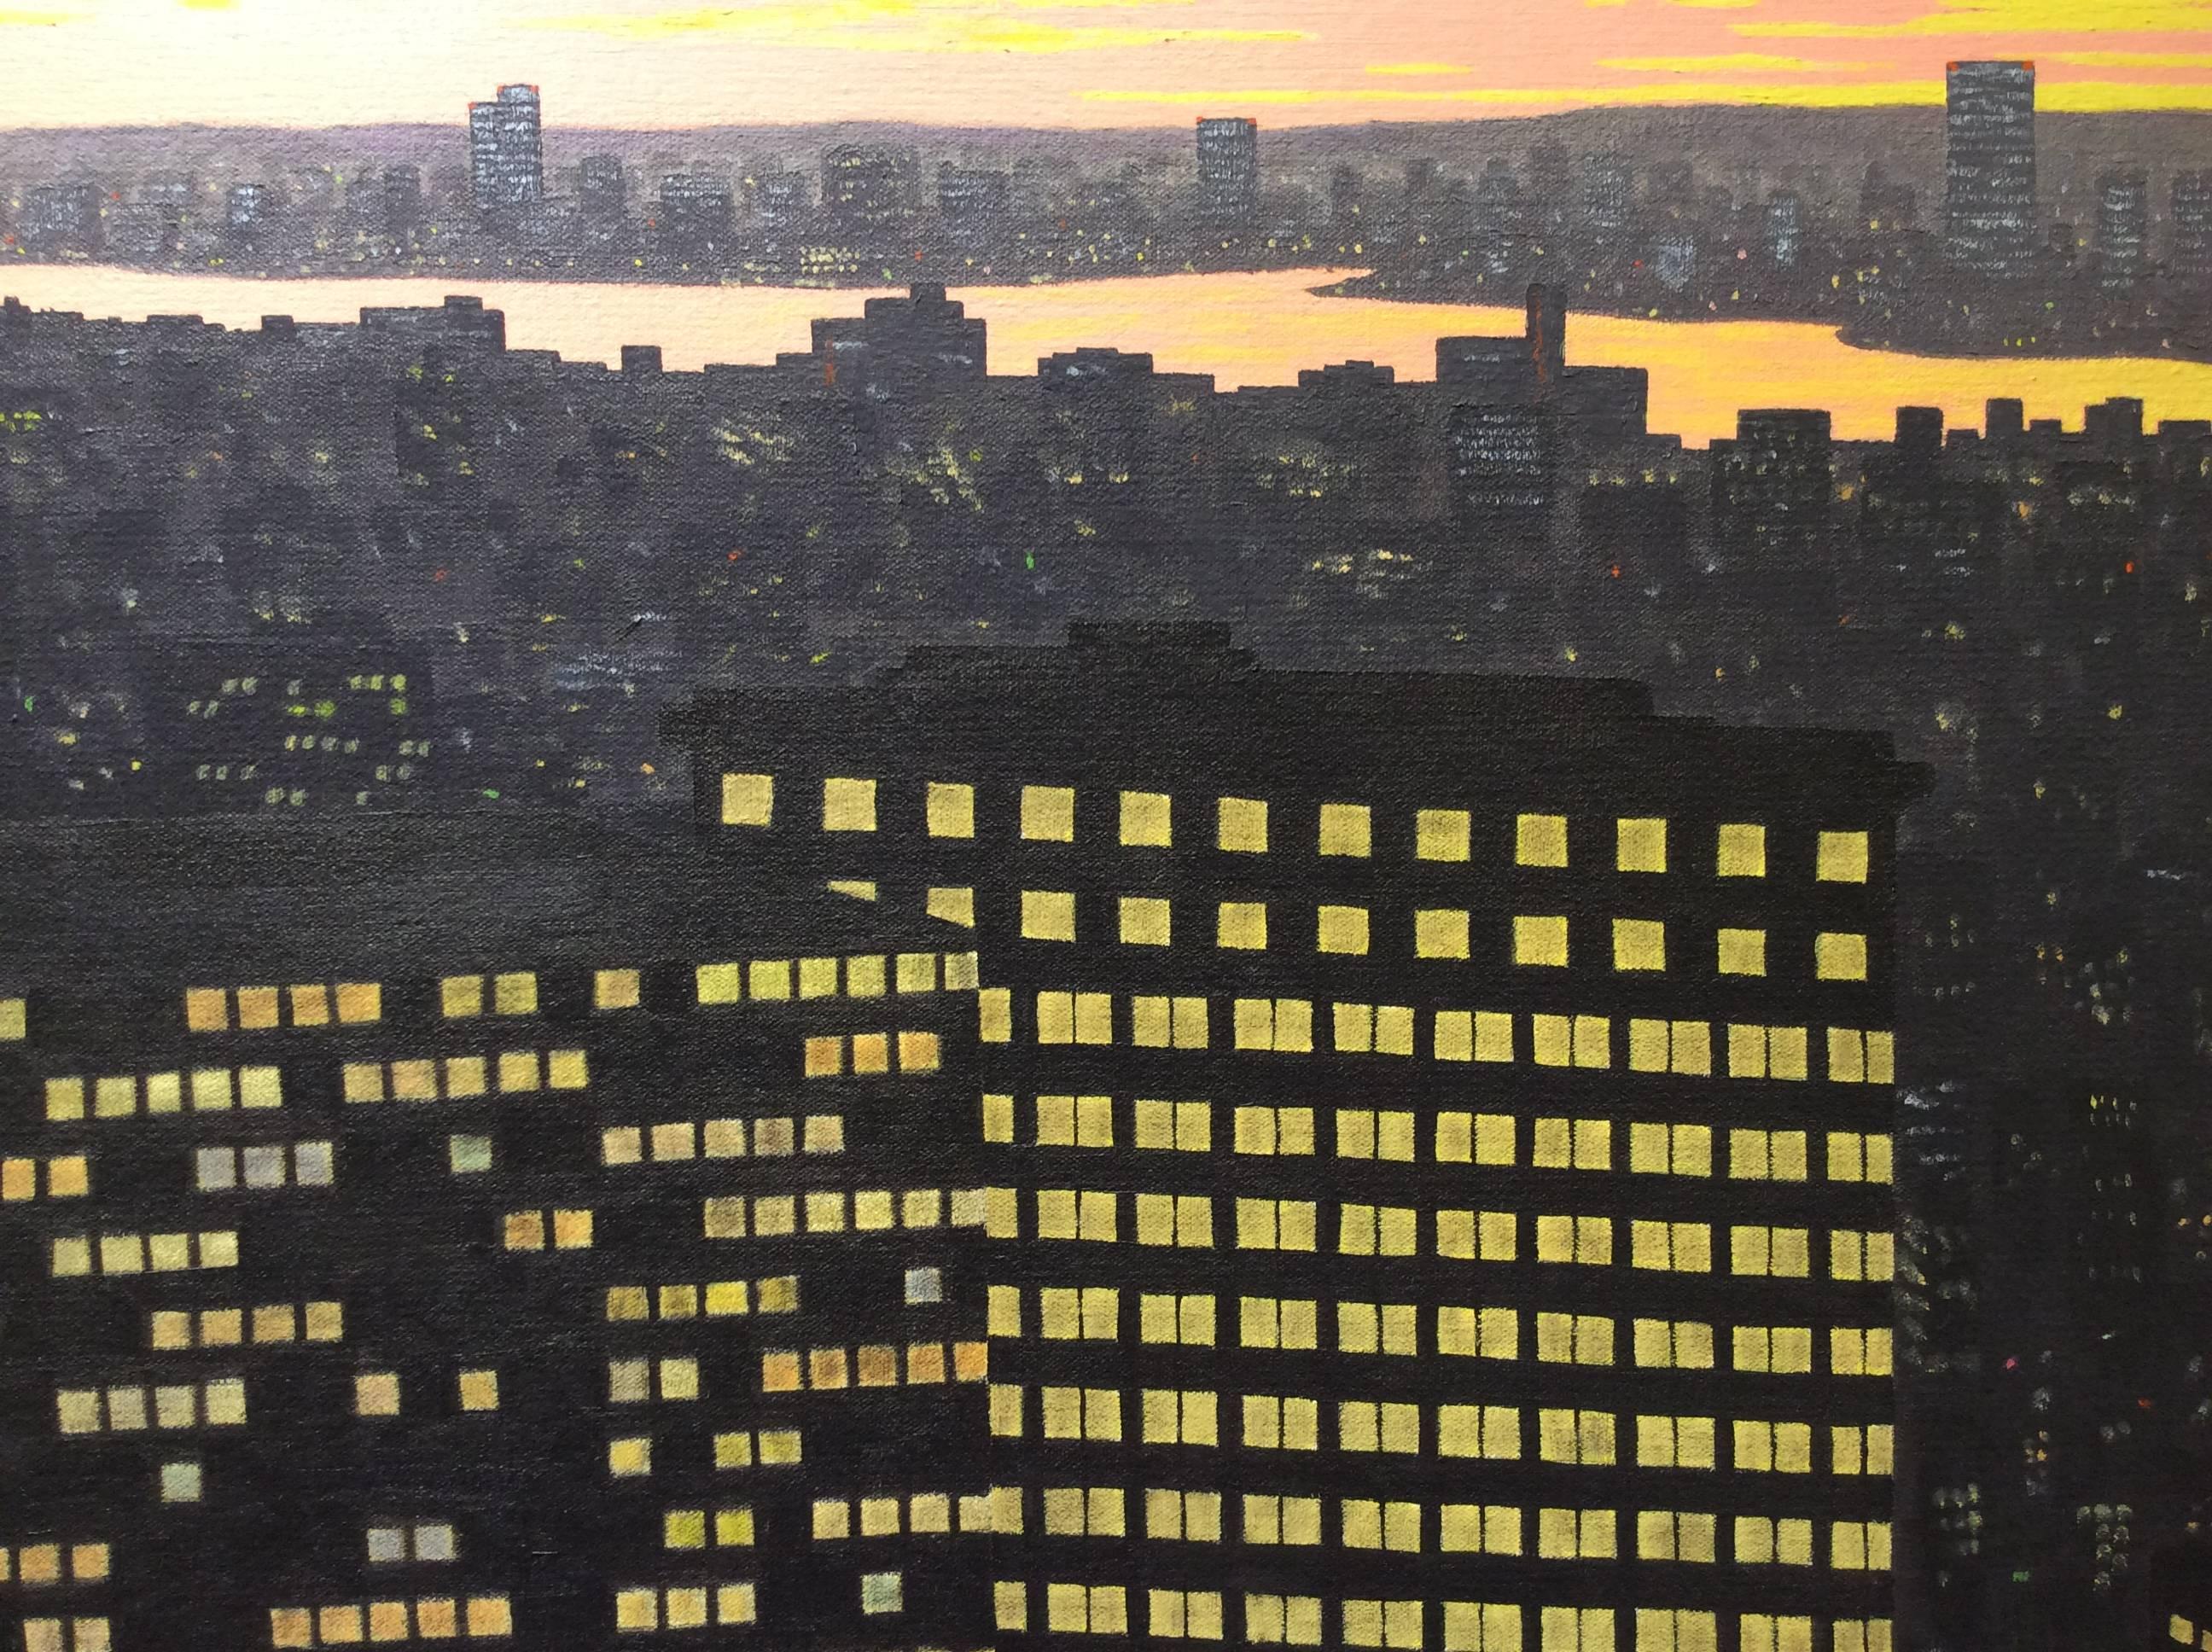 Bill Sullivan: New York, NY (Cityscape Oil Painting, Pink Sunset in Manhattan)
oil on canvas
66 x 64 x 1 inches, oil on canvas, thin wood stripping
No visible signature on the front.

This large work on canvas is a vibrant pink sunset over New York